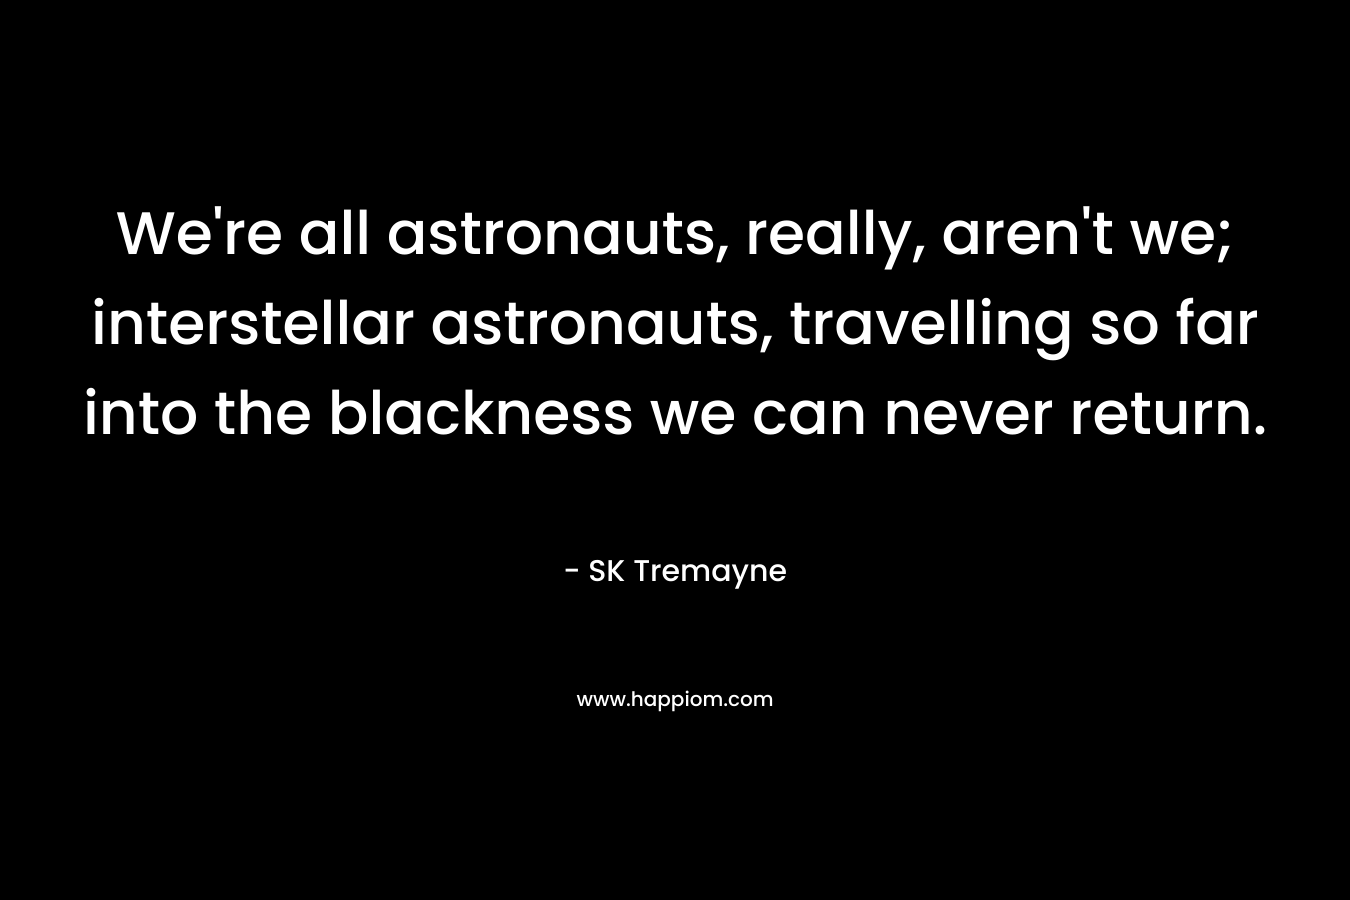 We're all astronauts, really, aren't we; interstellar astronauts, travelling so far into the blackness we can never return.